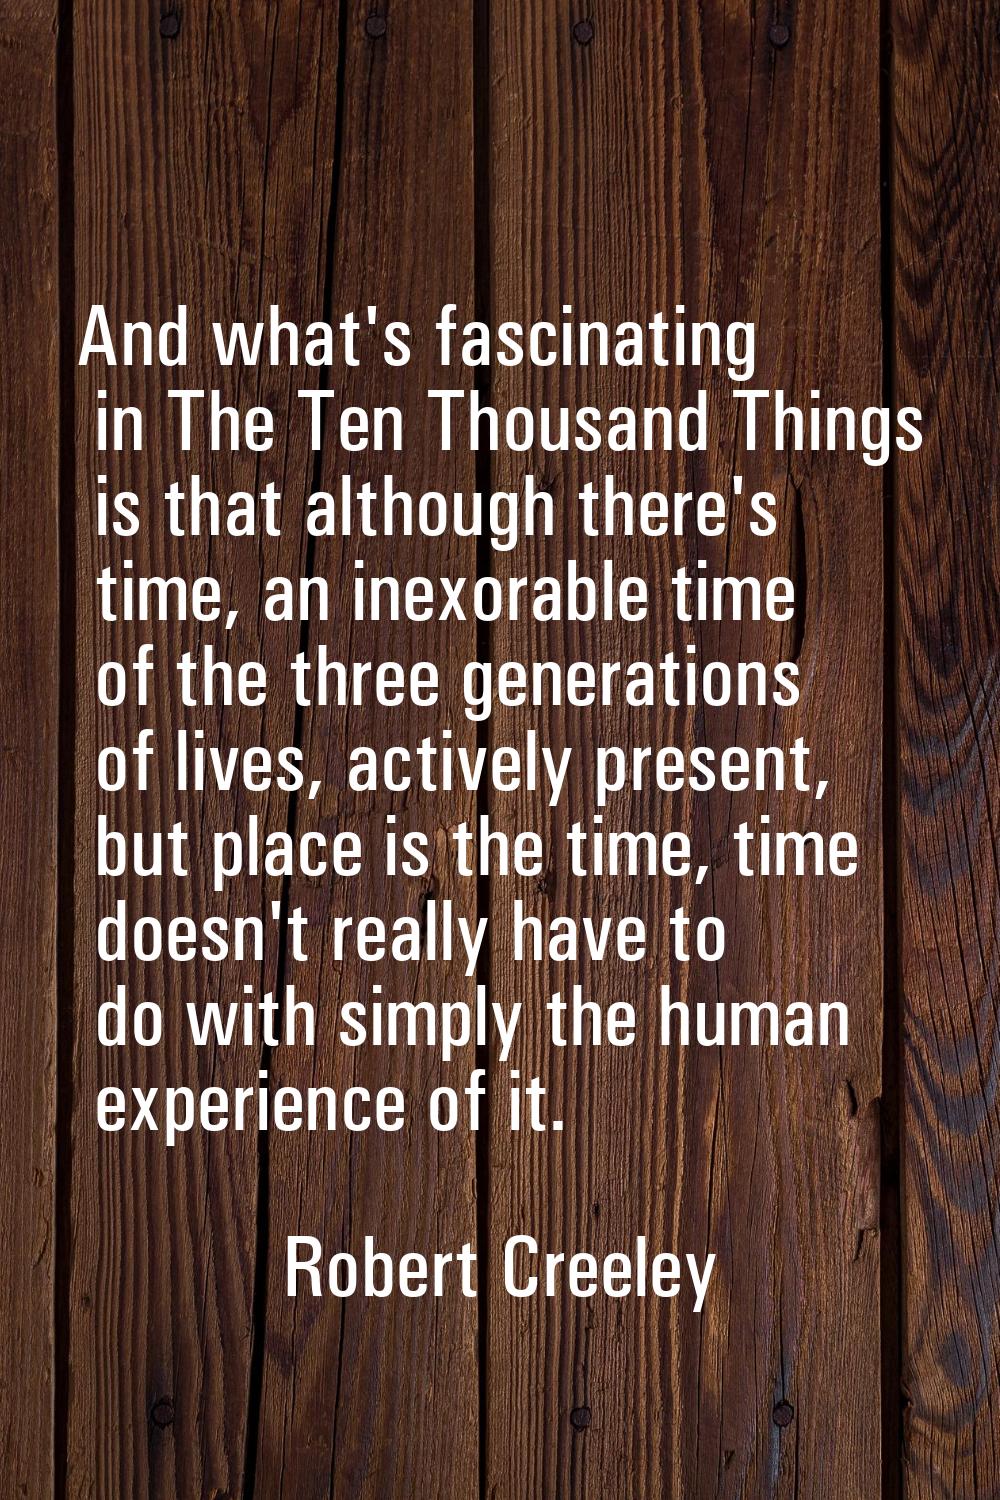 And what's fascinating in The Ten Thousand Things is that although there's time, an inexorable time